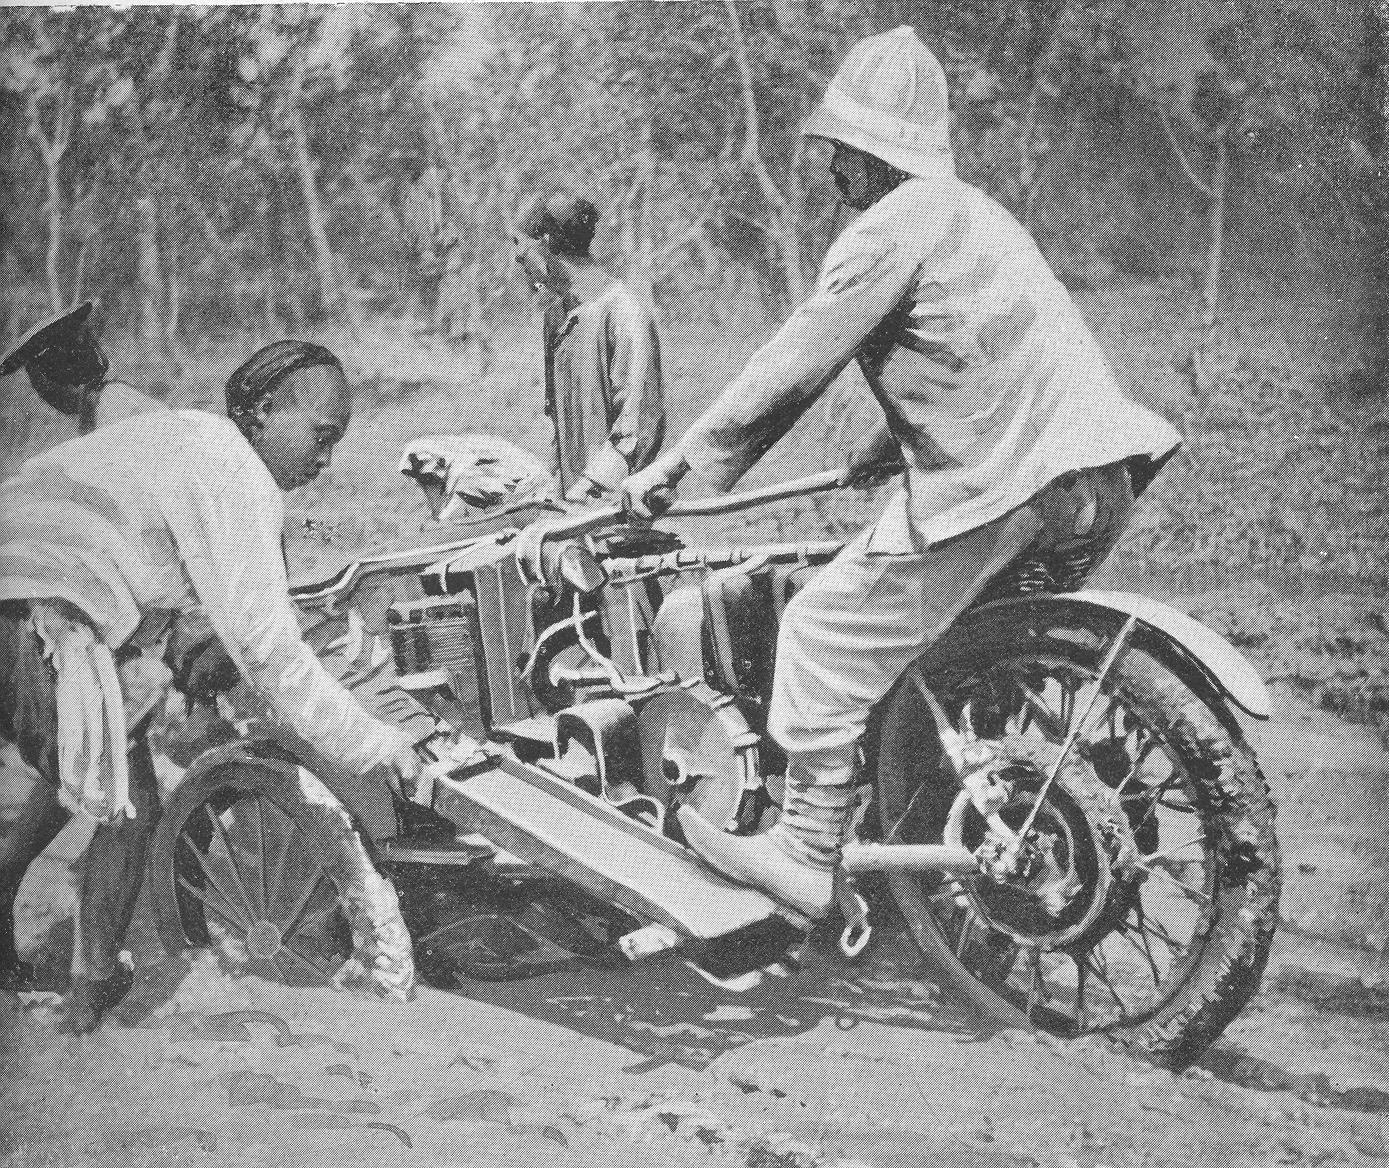 Peking to Paris, 3-wheeler being readied for race it couldn’t finish in 1907, ClassicCars.com Journal